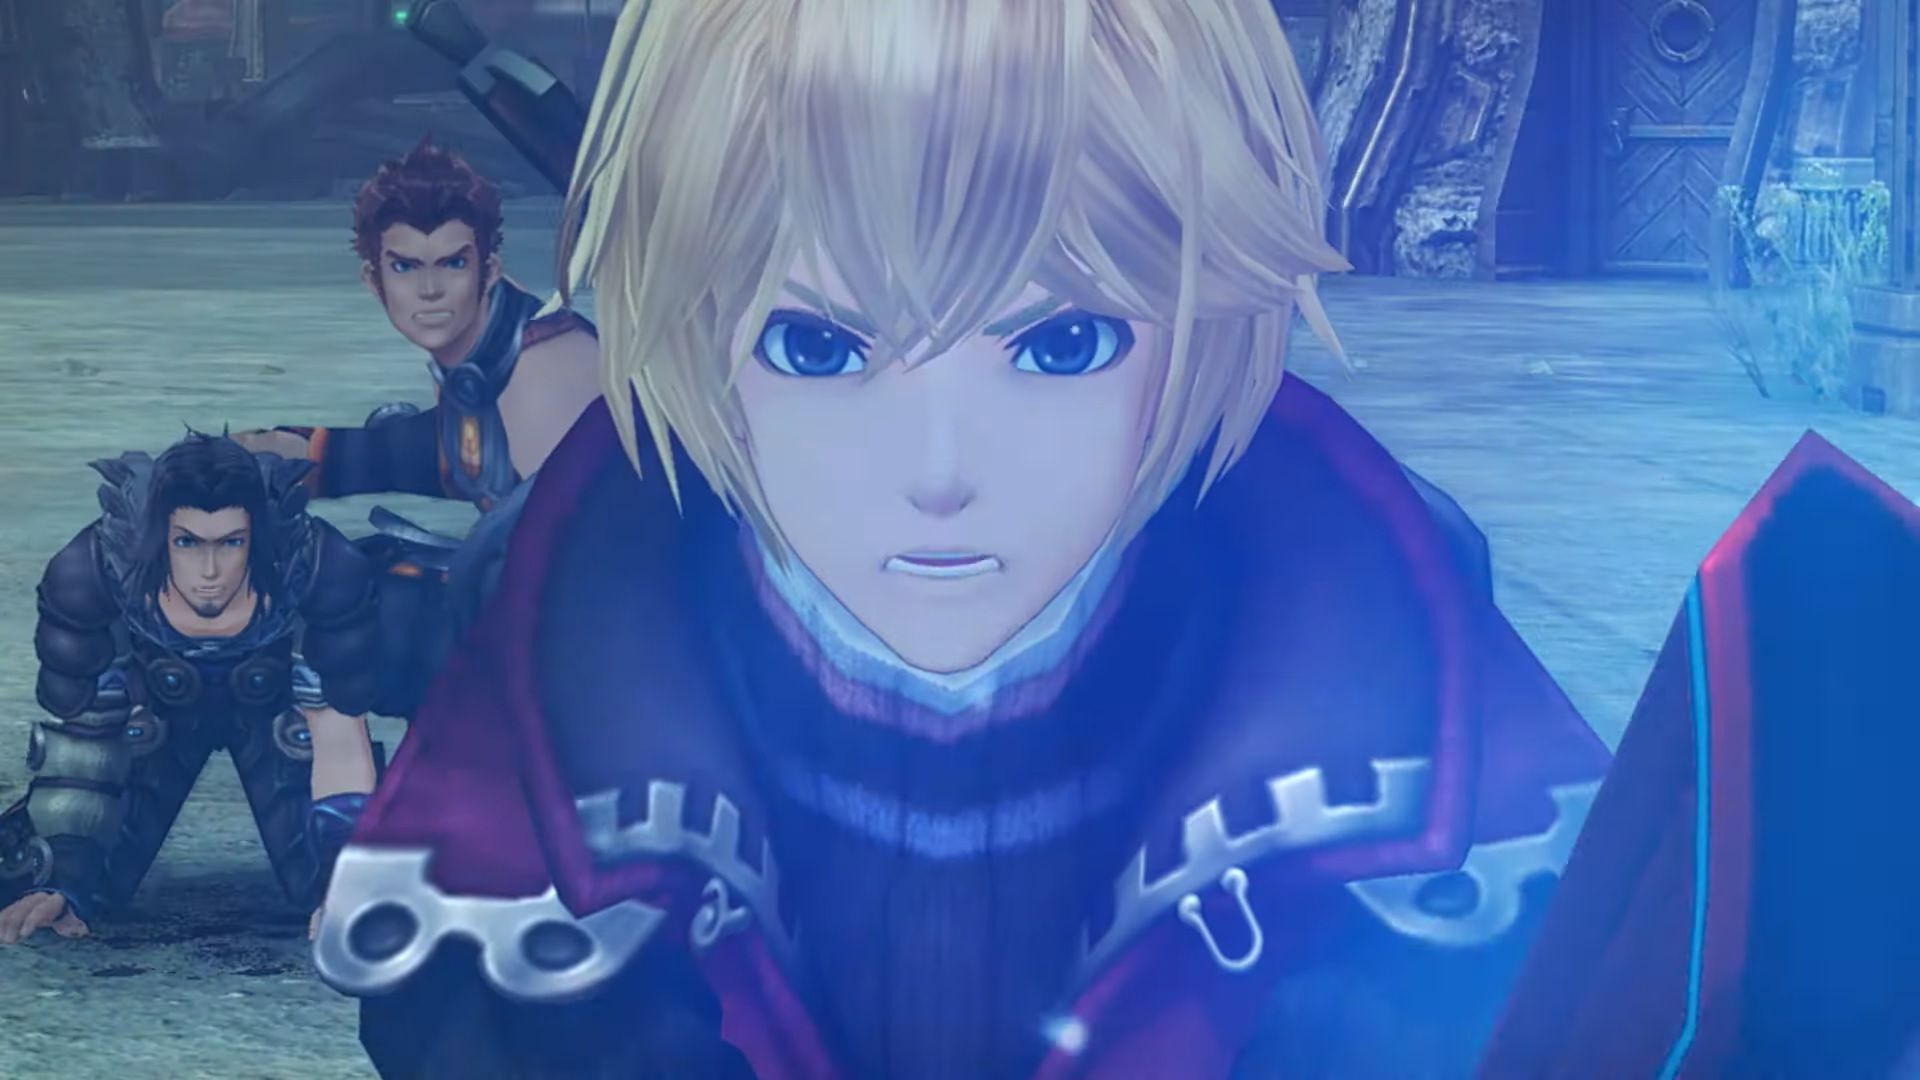 Xenoblade Chronicles: Definitive Edition won't include 3DS version